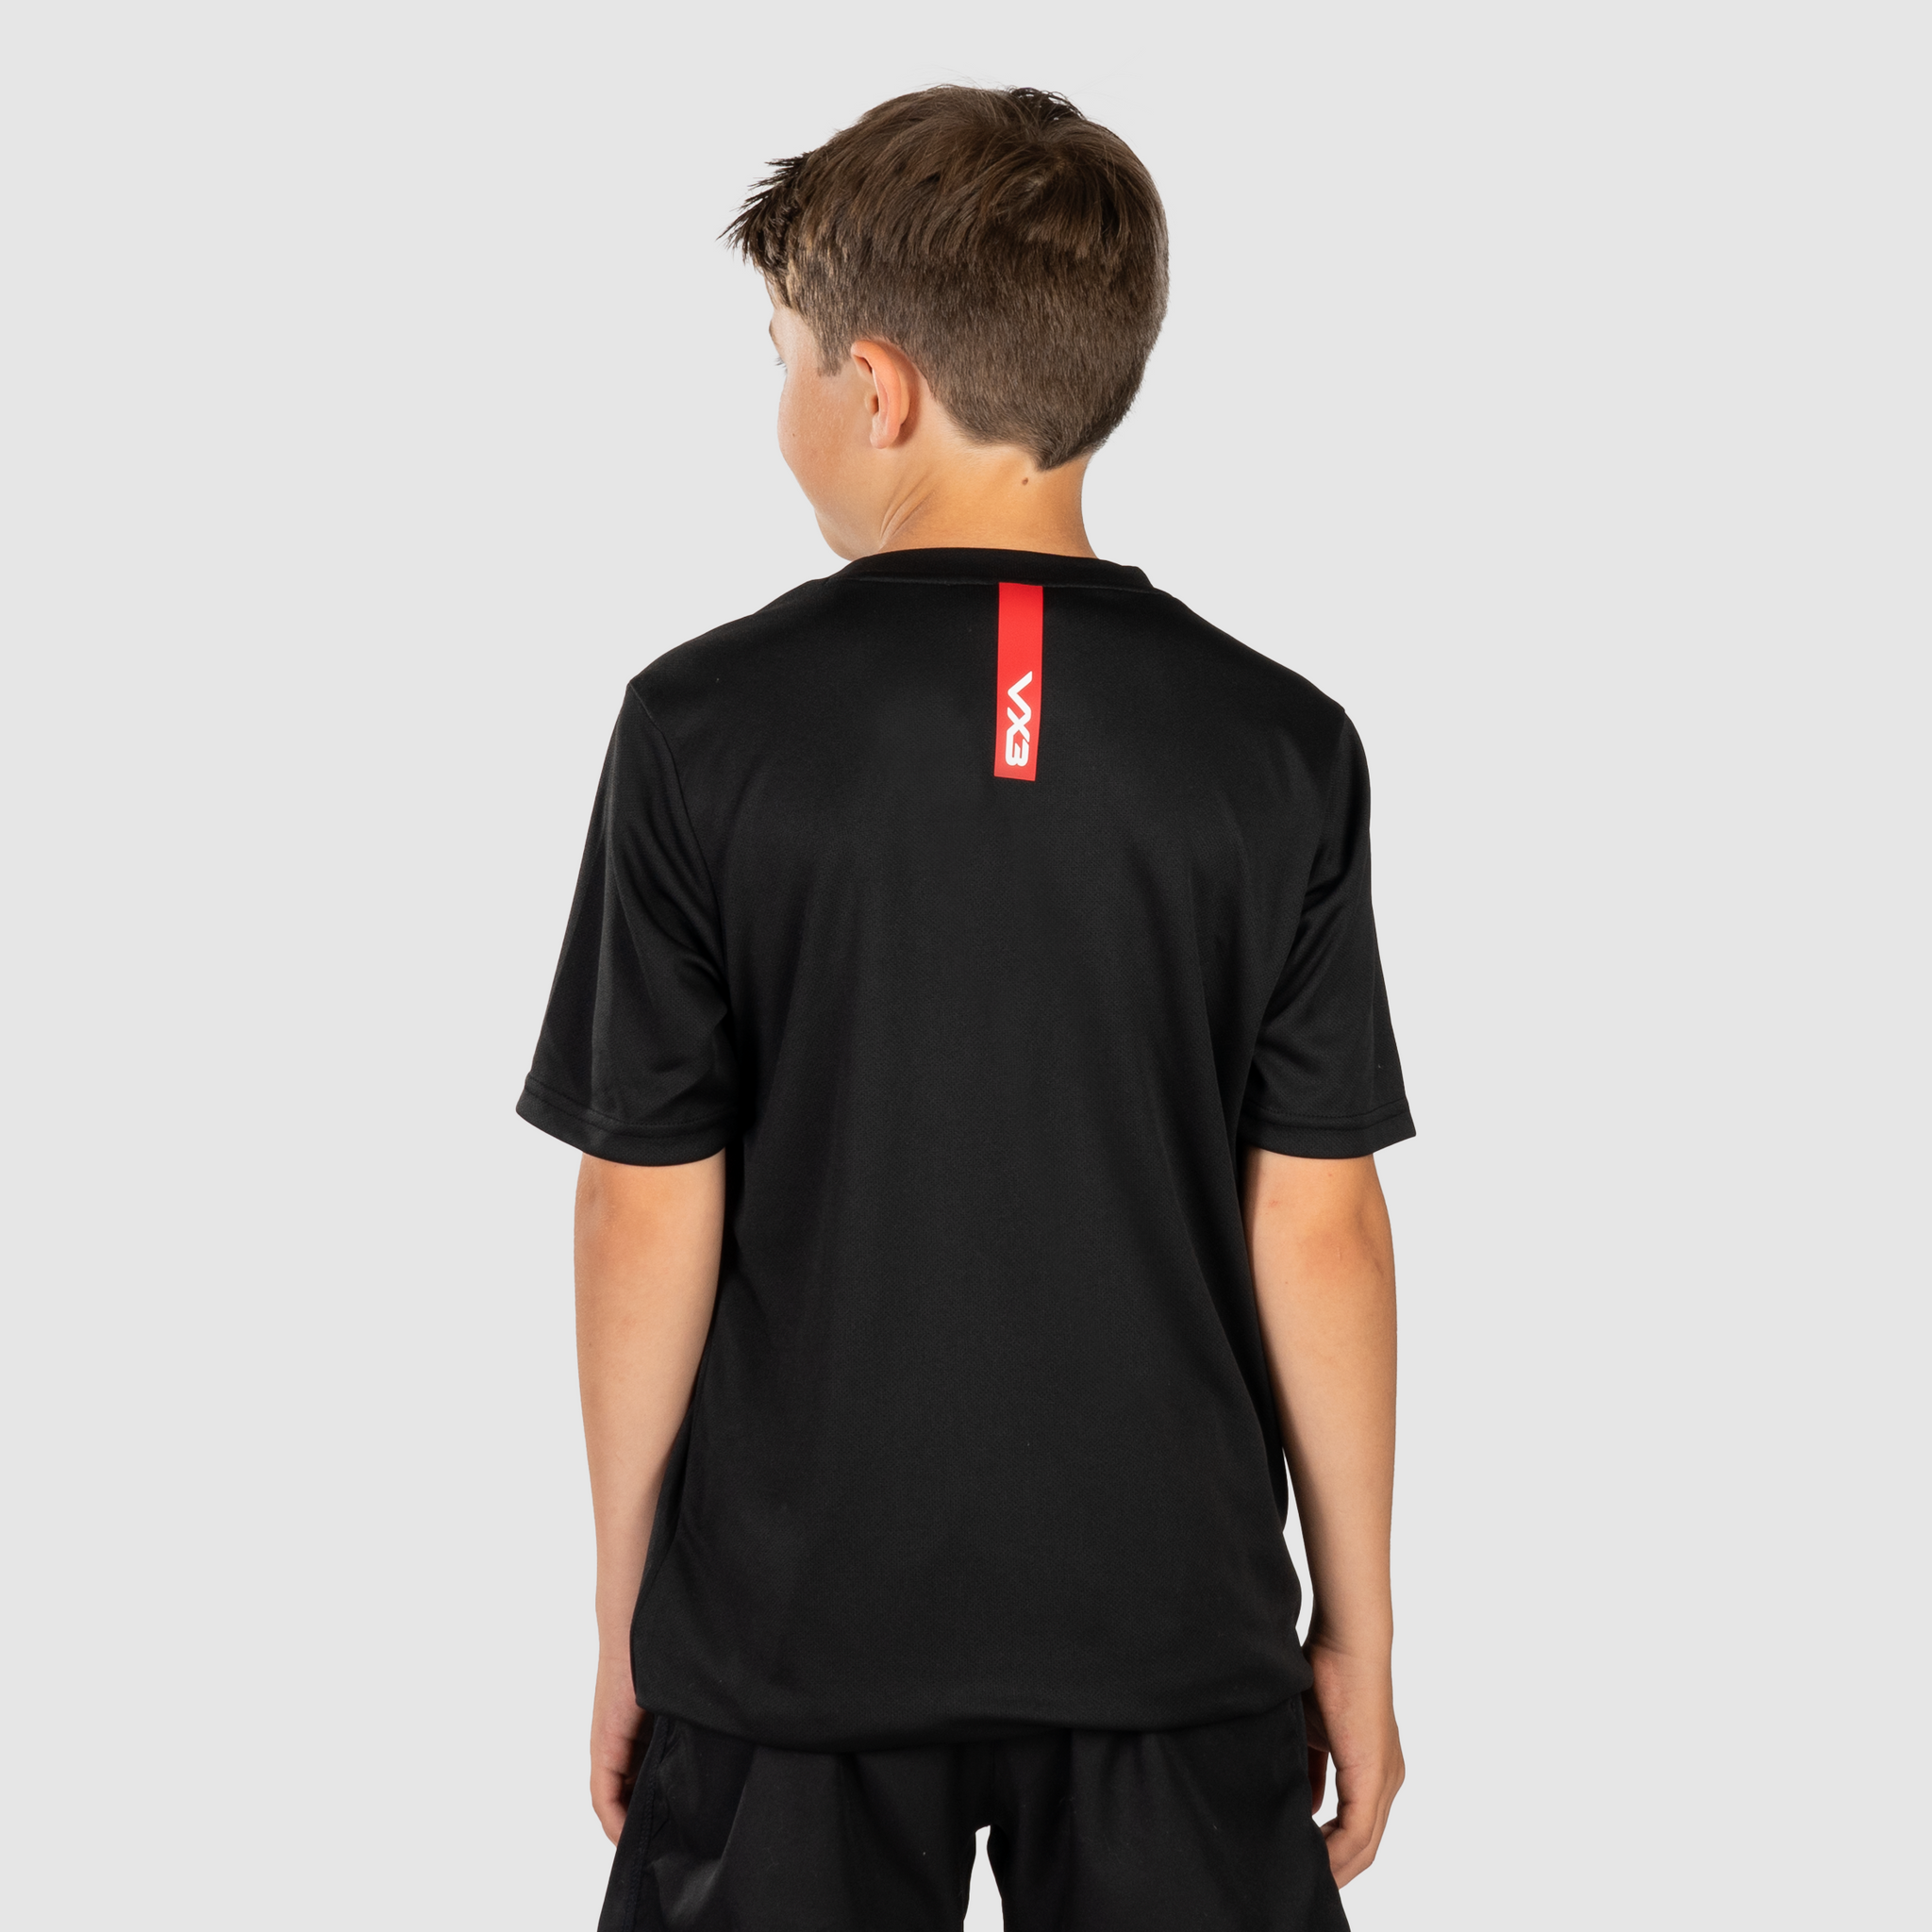 Fortis Youth Tee Black/Red